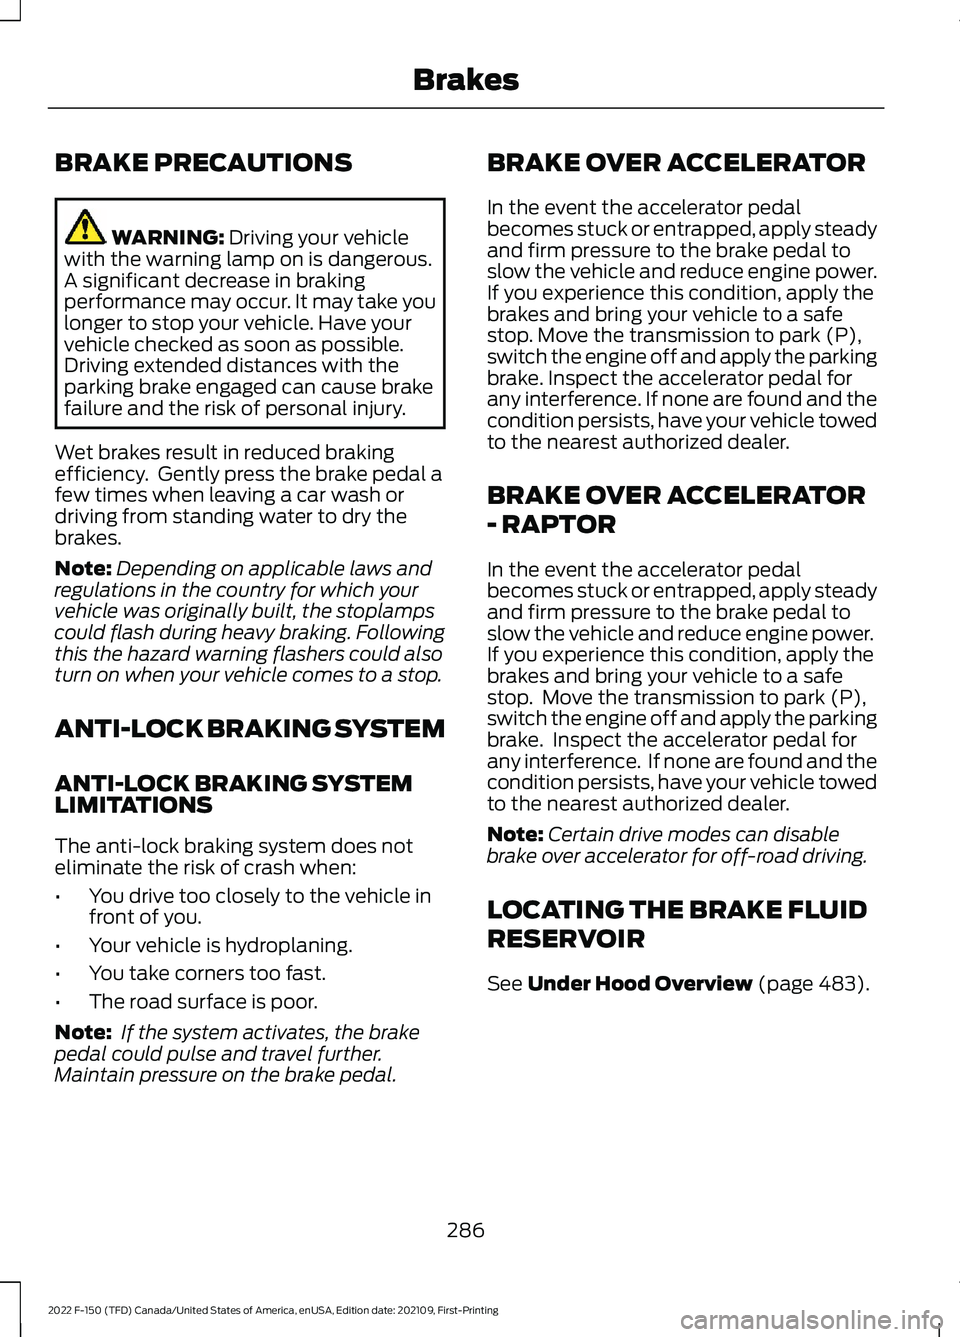 FORD F-150 2022  Owners Manual BRAKE PRECAUTIONS
WARNING: Driving your vehicle
with the warning lamp on is dangerous.
A significant decrease in braking
performance may occur. It may take you
longer to stop your vehicle. Have your
v